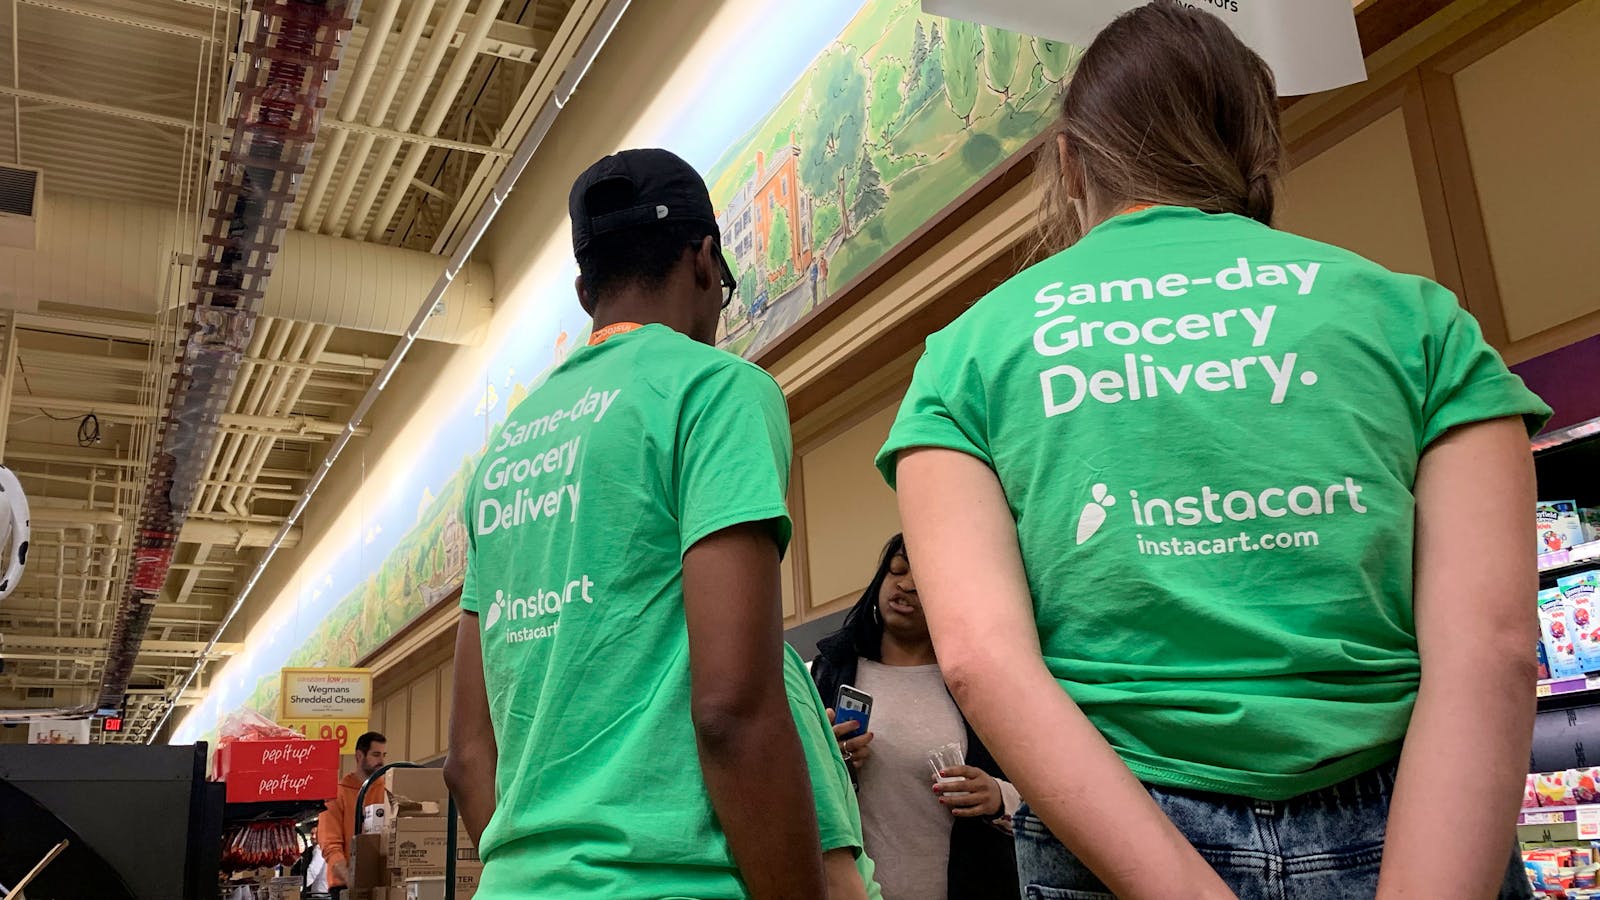 Workers from Instacart, the same-day grocery delivery service, receive instructions at a grocery store. Photo by AP.